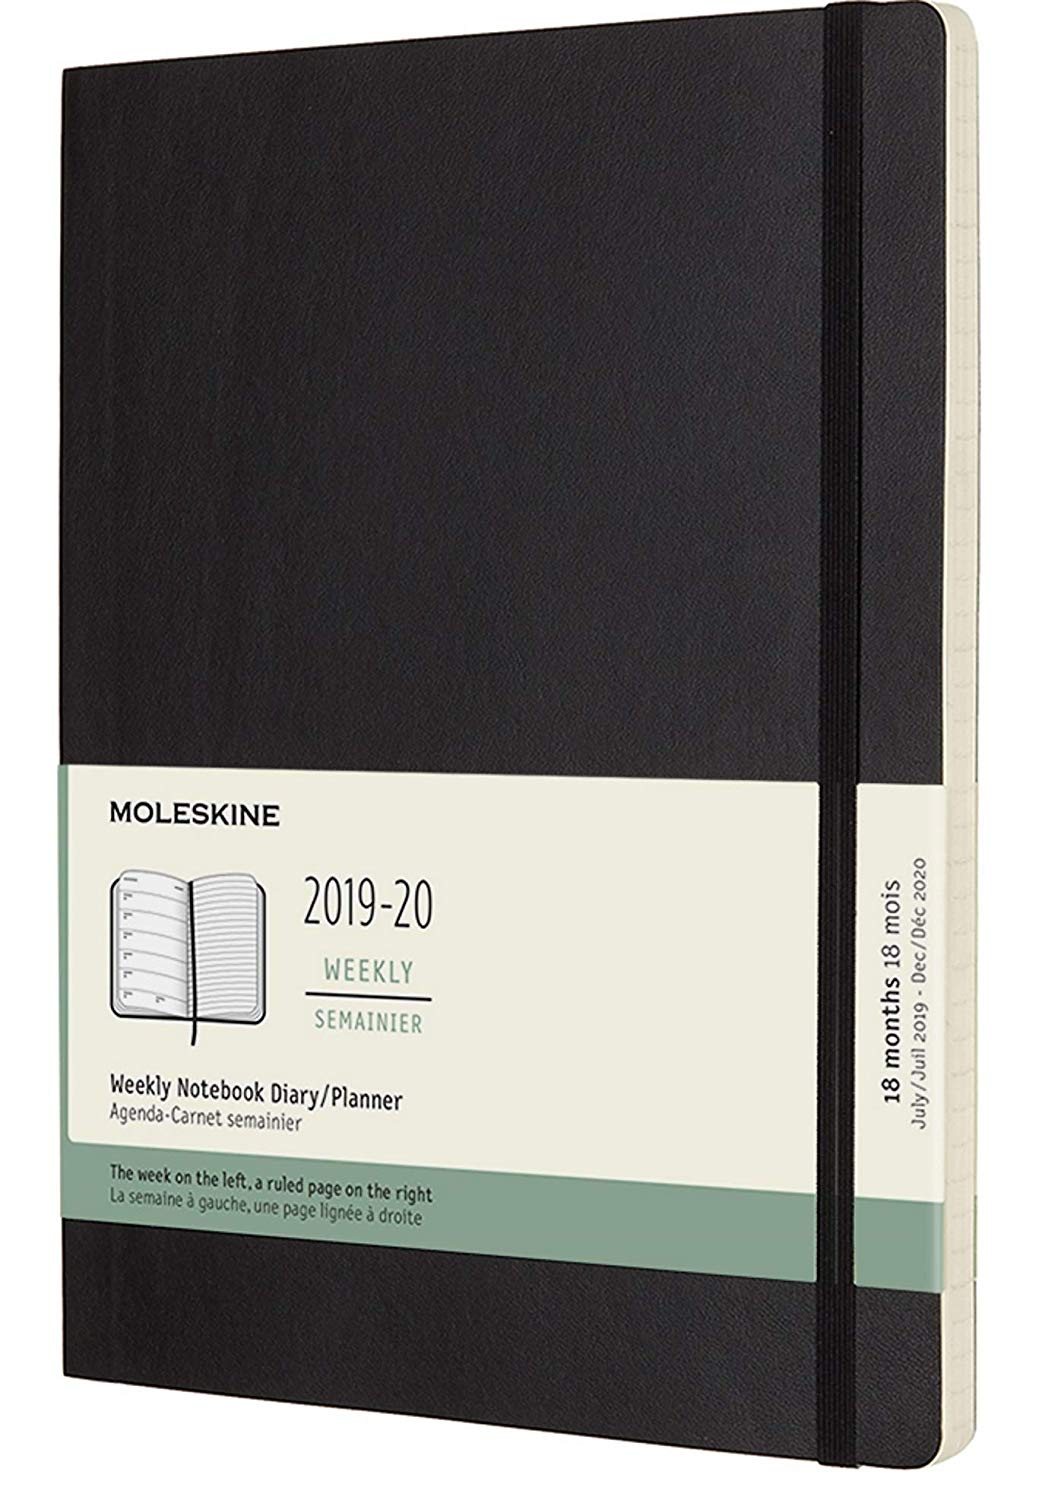 Agenda 2019-2020 - Moleskine 18 Months Weekly Notebook Diary and Planner - Black, Extra Large, Soft Cover | Moleskine